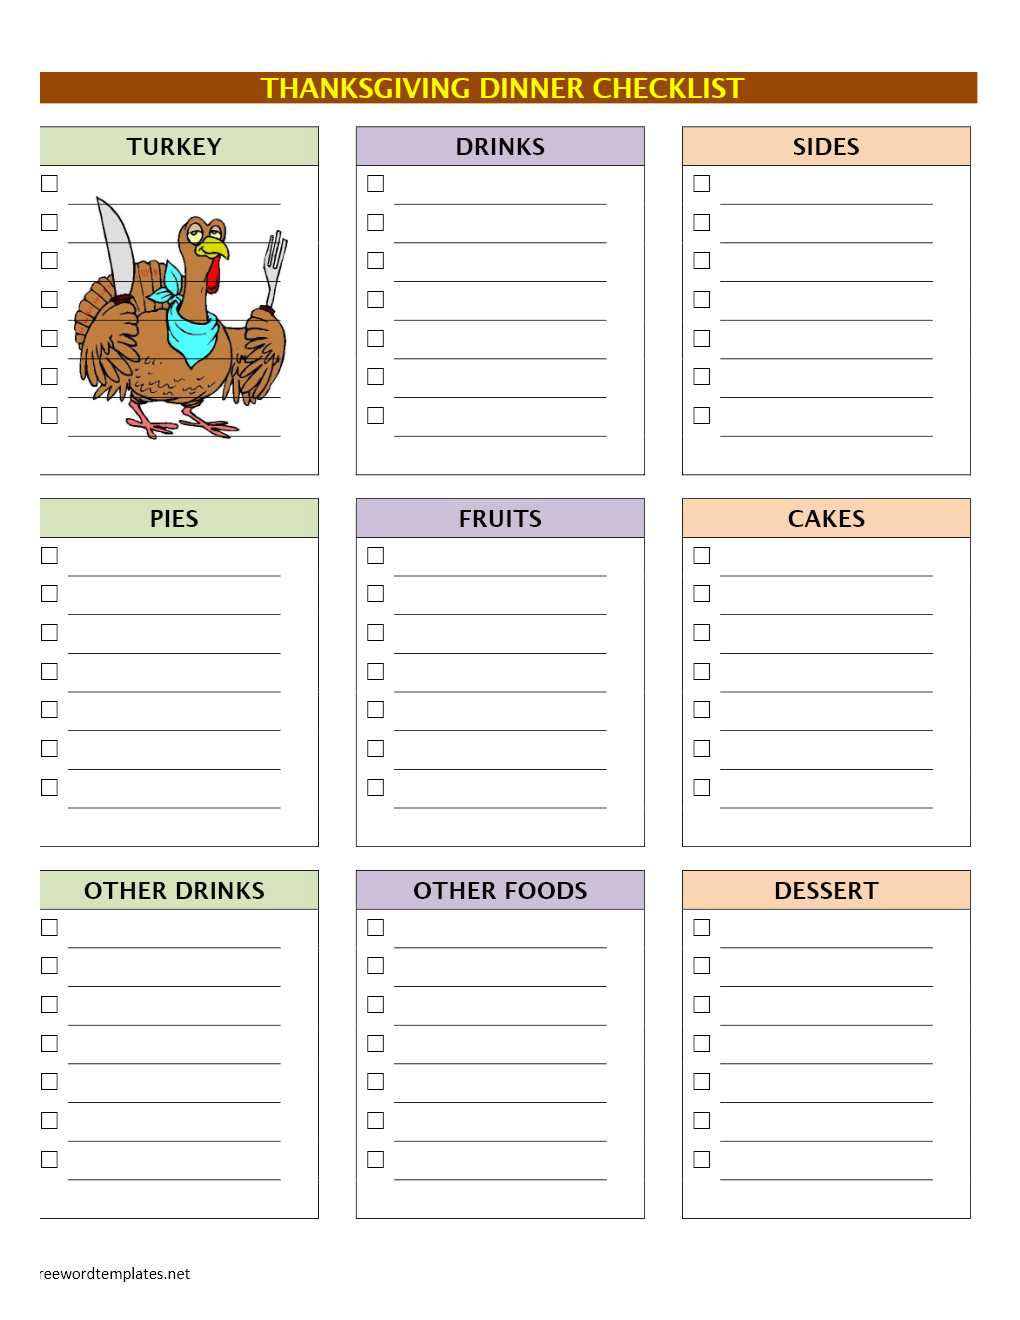 The Best Ideas For Thanksgiving Dinner Checklist Best Recipes Ever